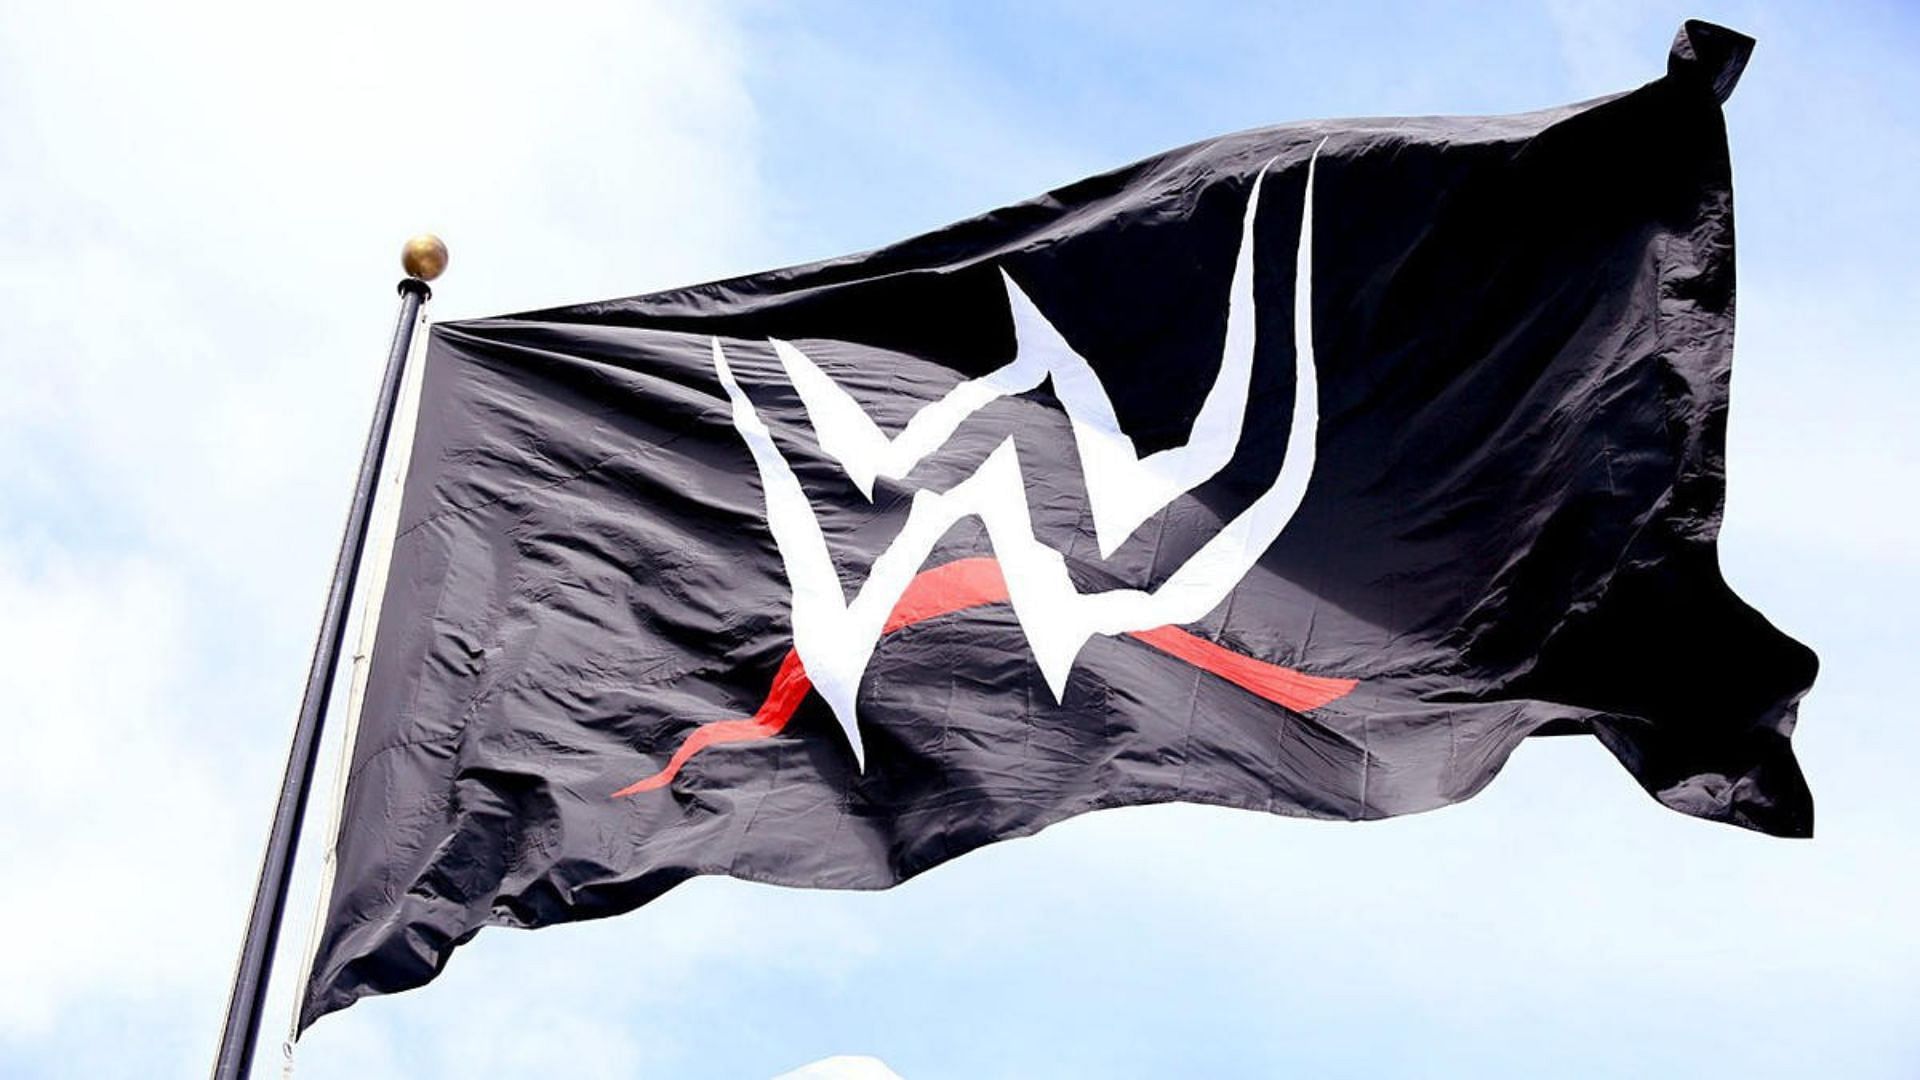 WWE and AEW are currently engaged in a bidding war for the industry